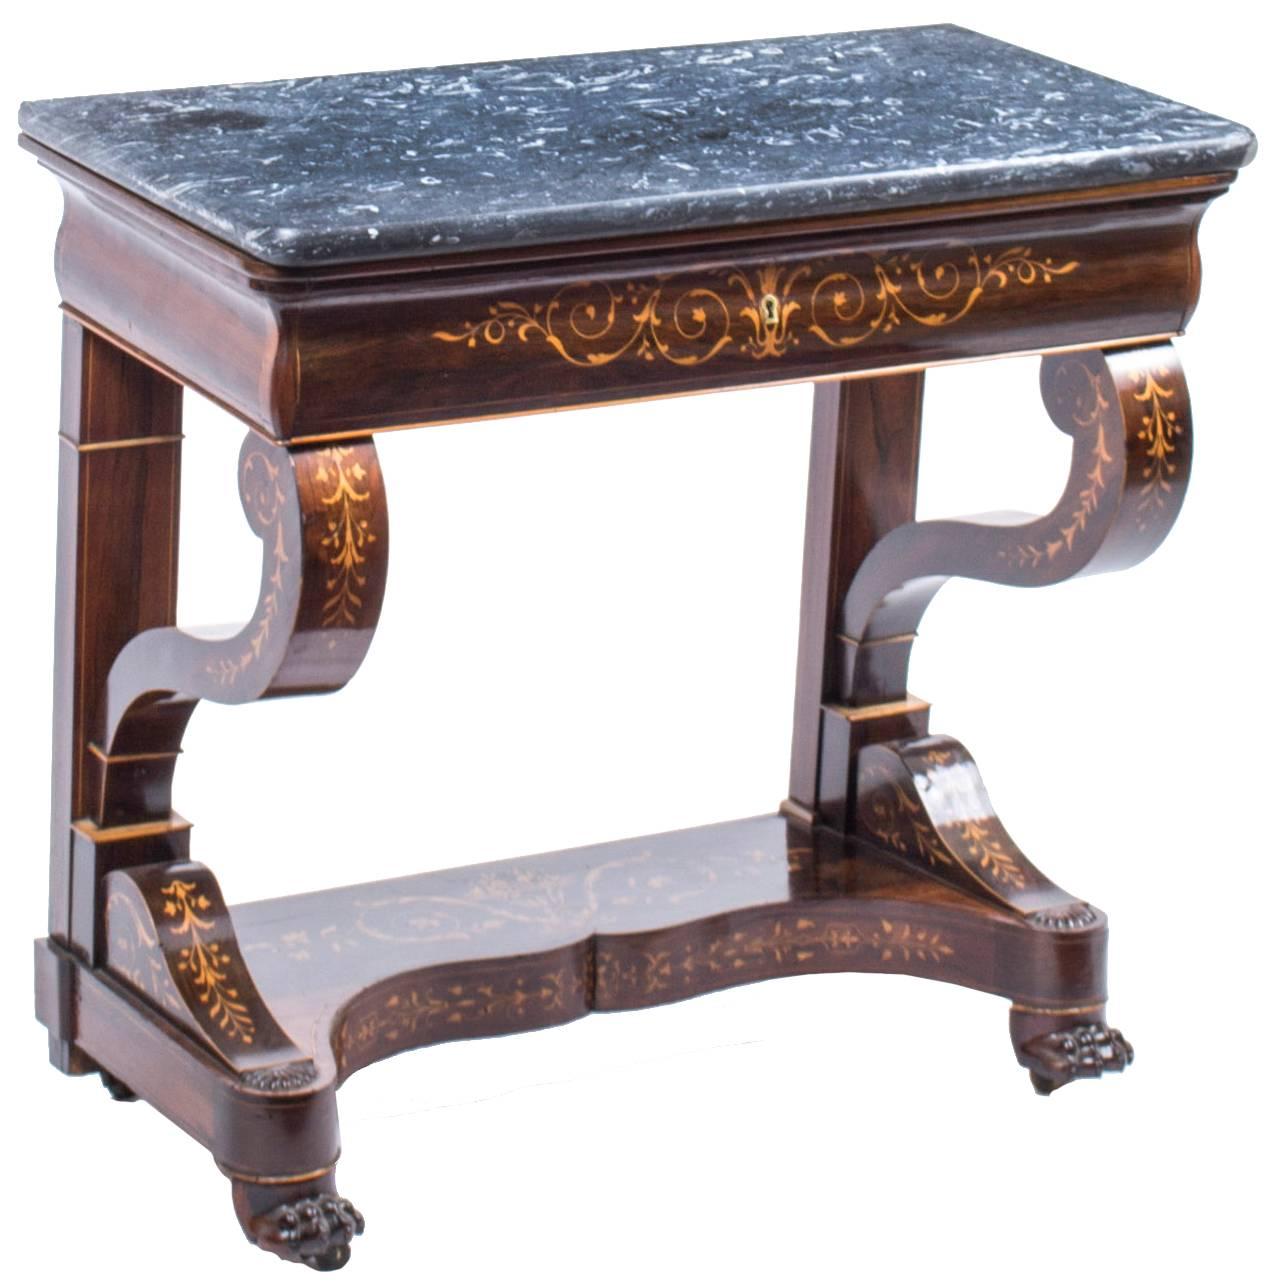  19th Century Charles X Period Rosewood Inlaid Console Table